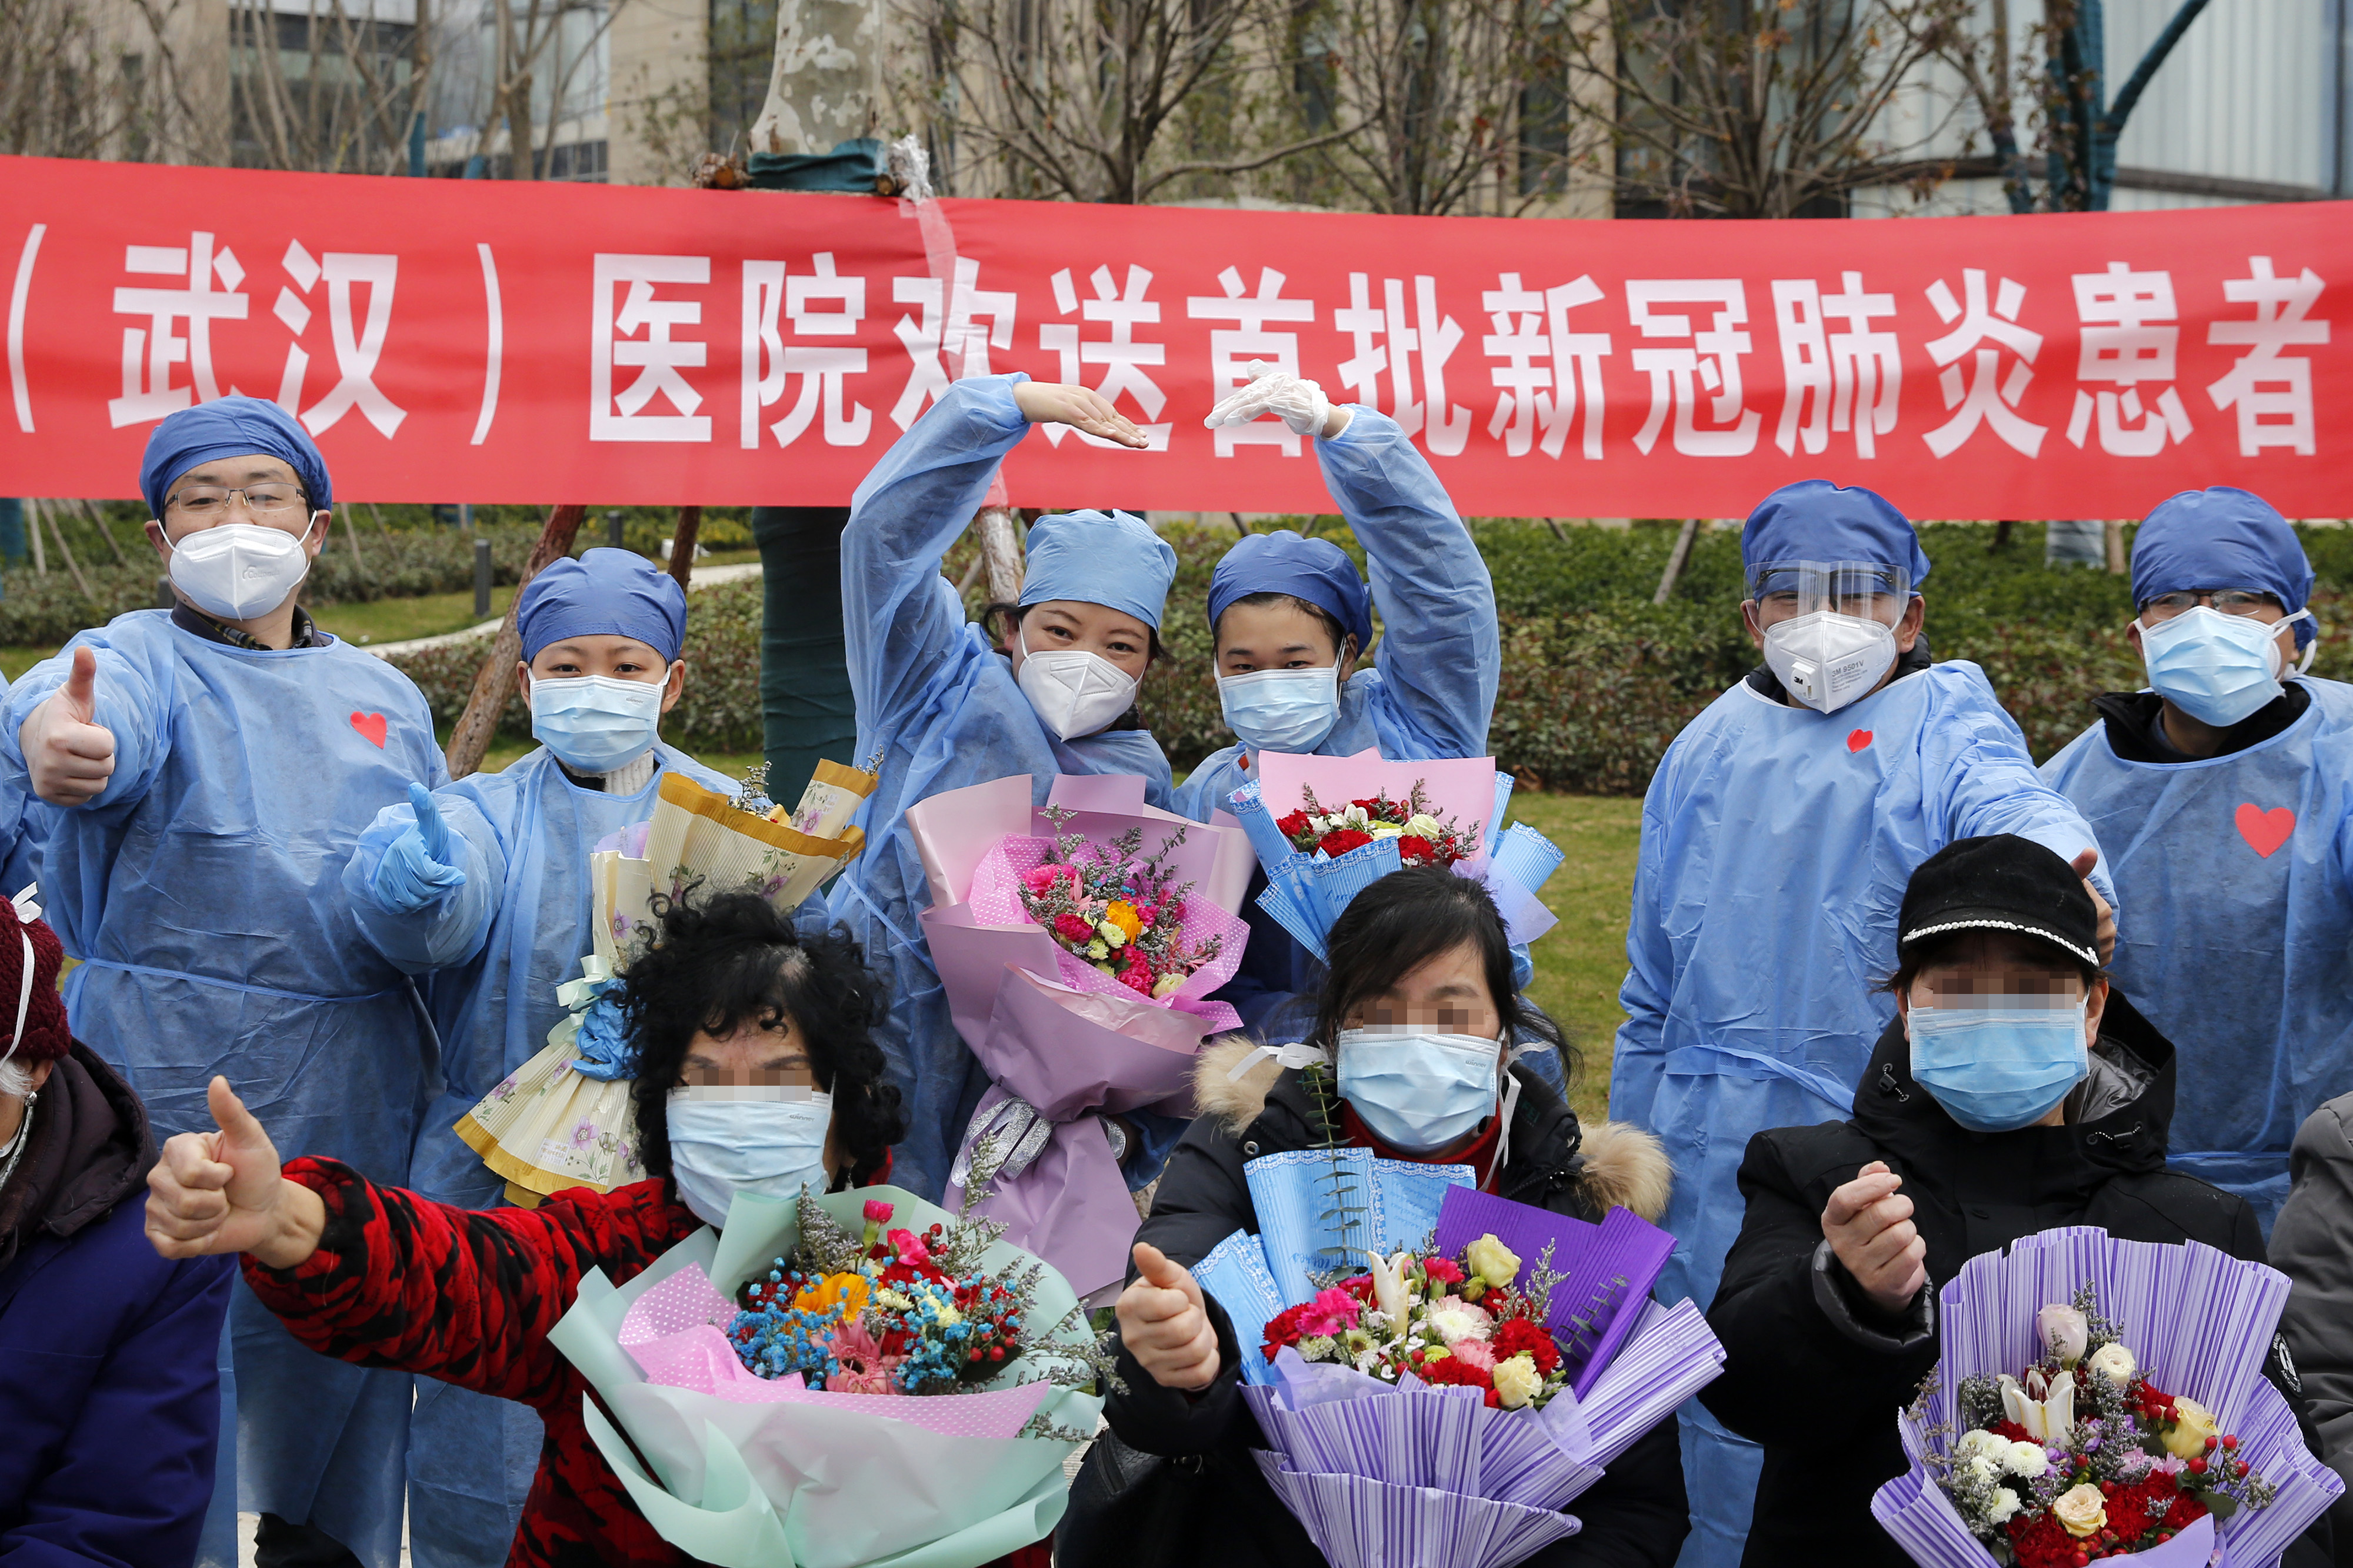 New COVID-19 cases drop for 16 straight days outside Hubei